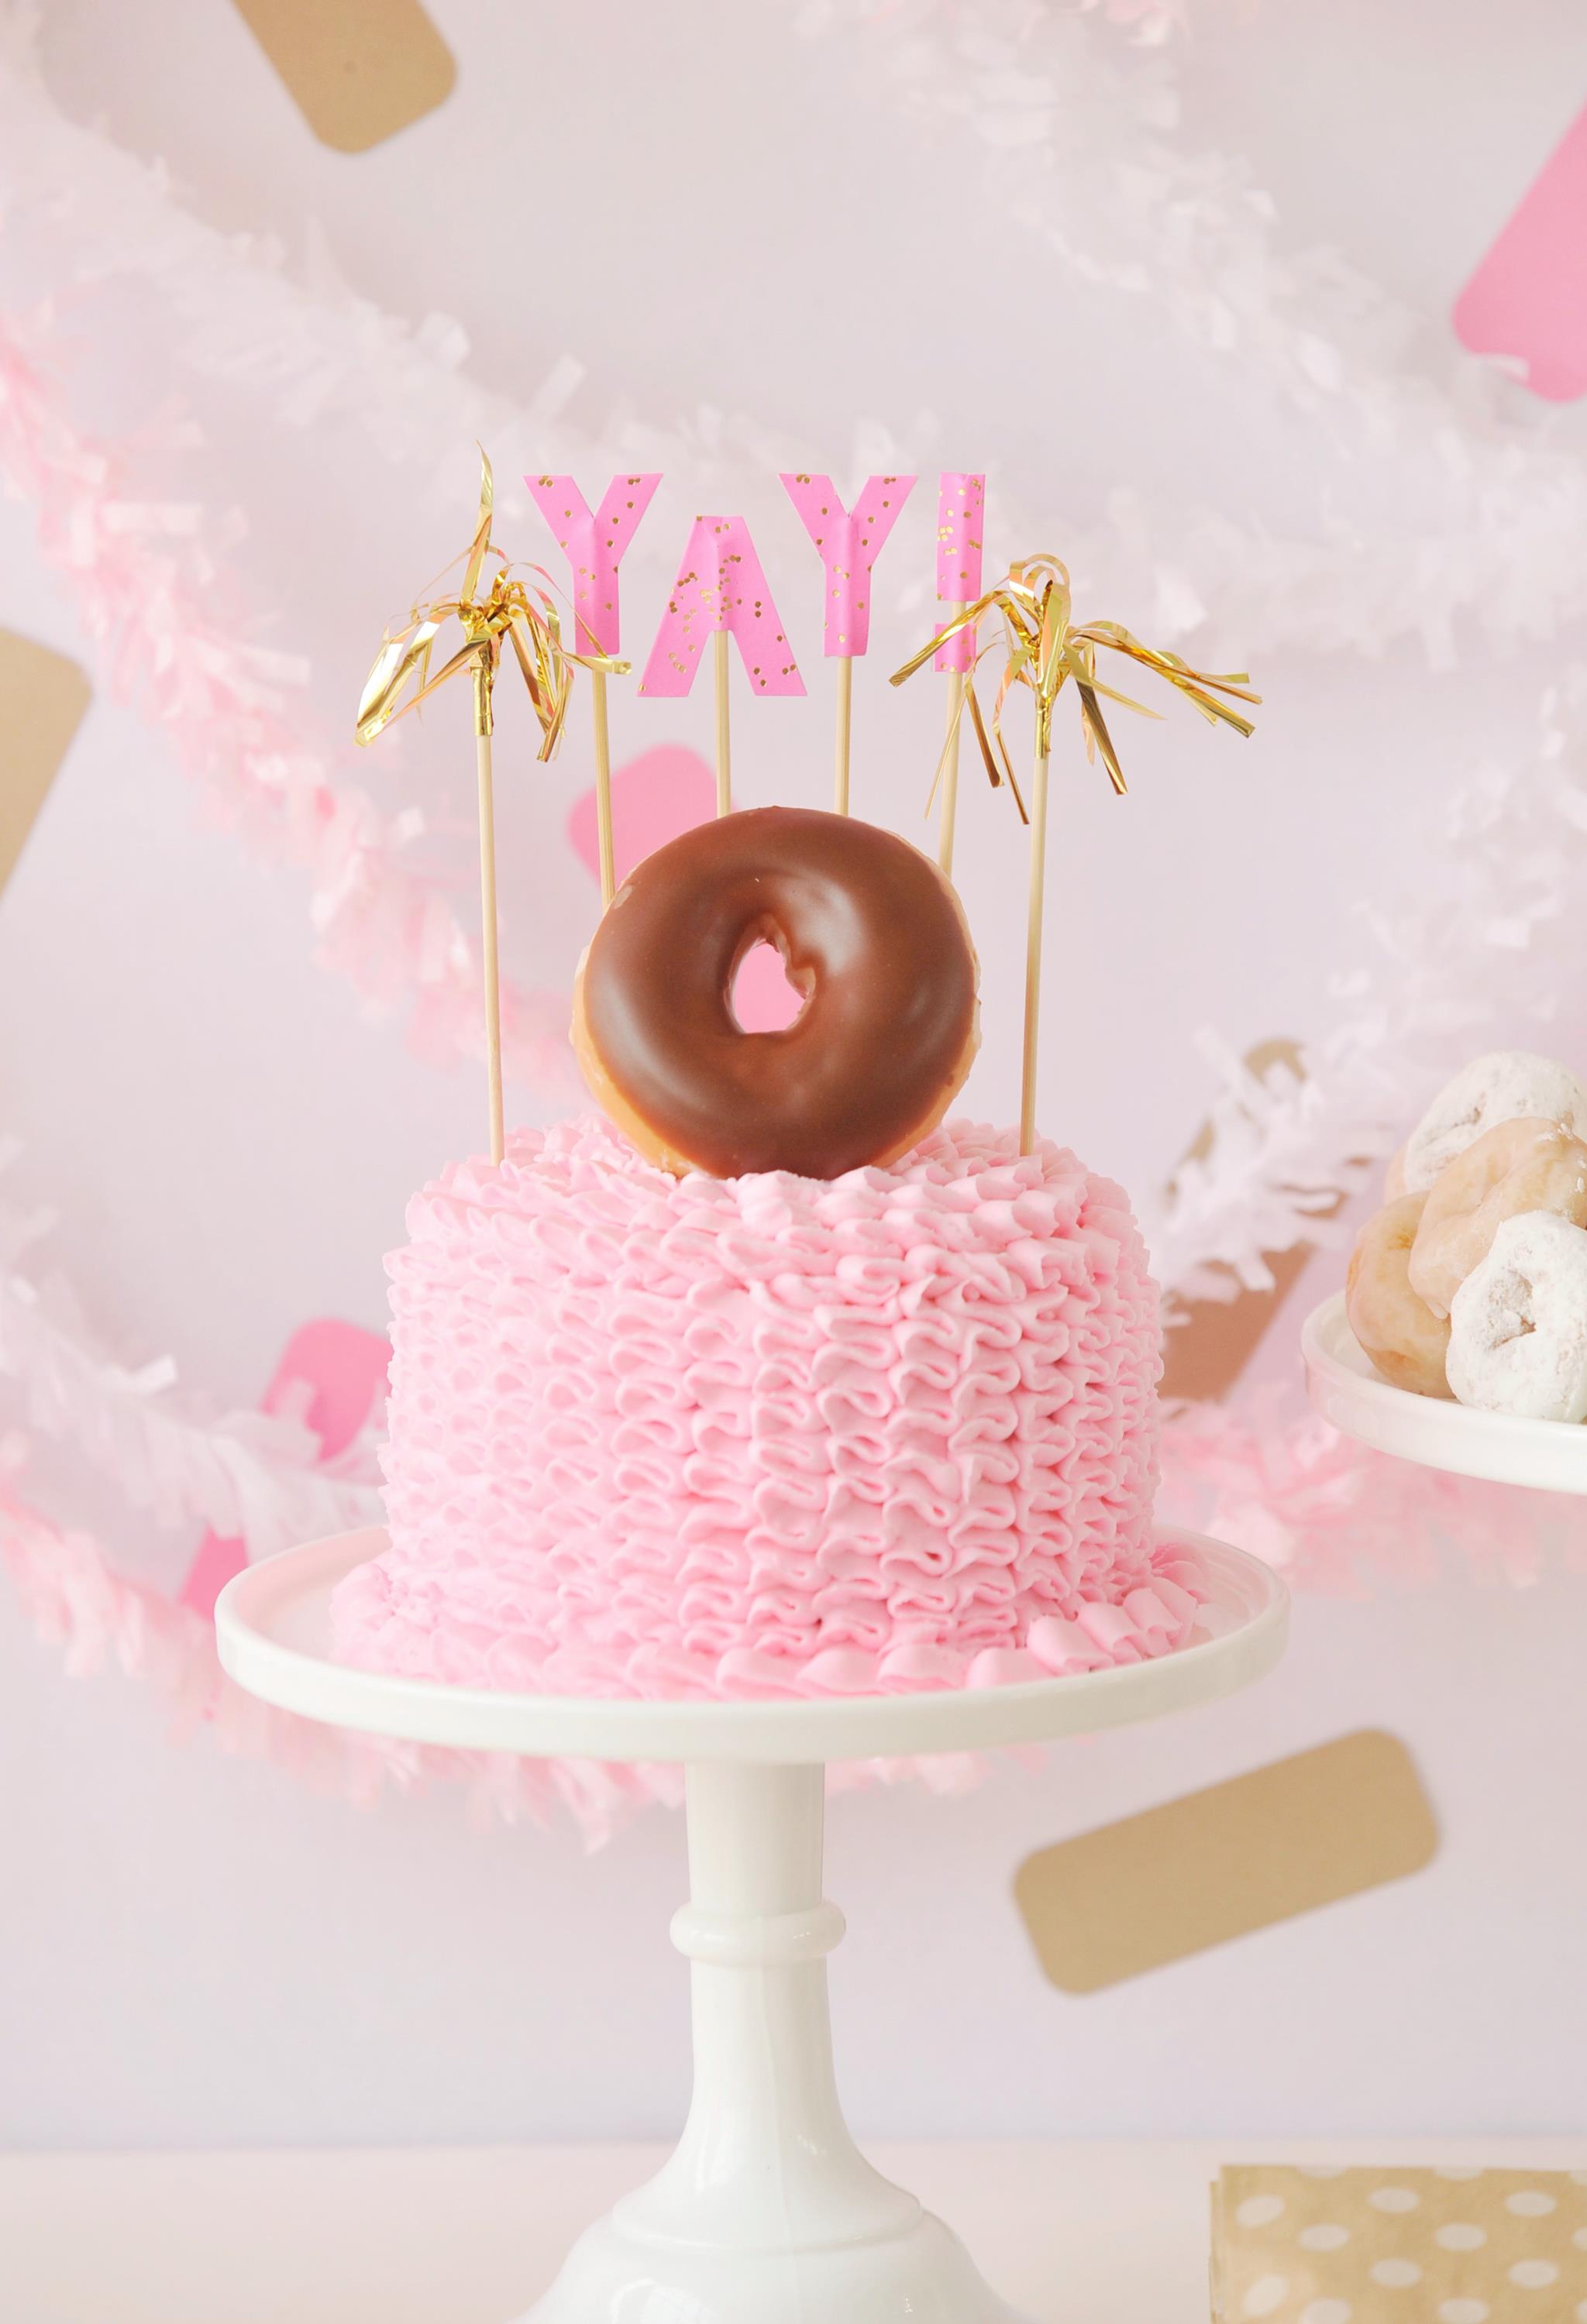 Donut-Themed Kids Party Cake